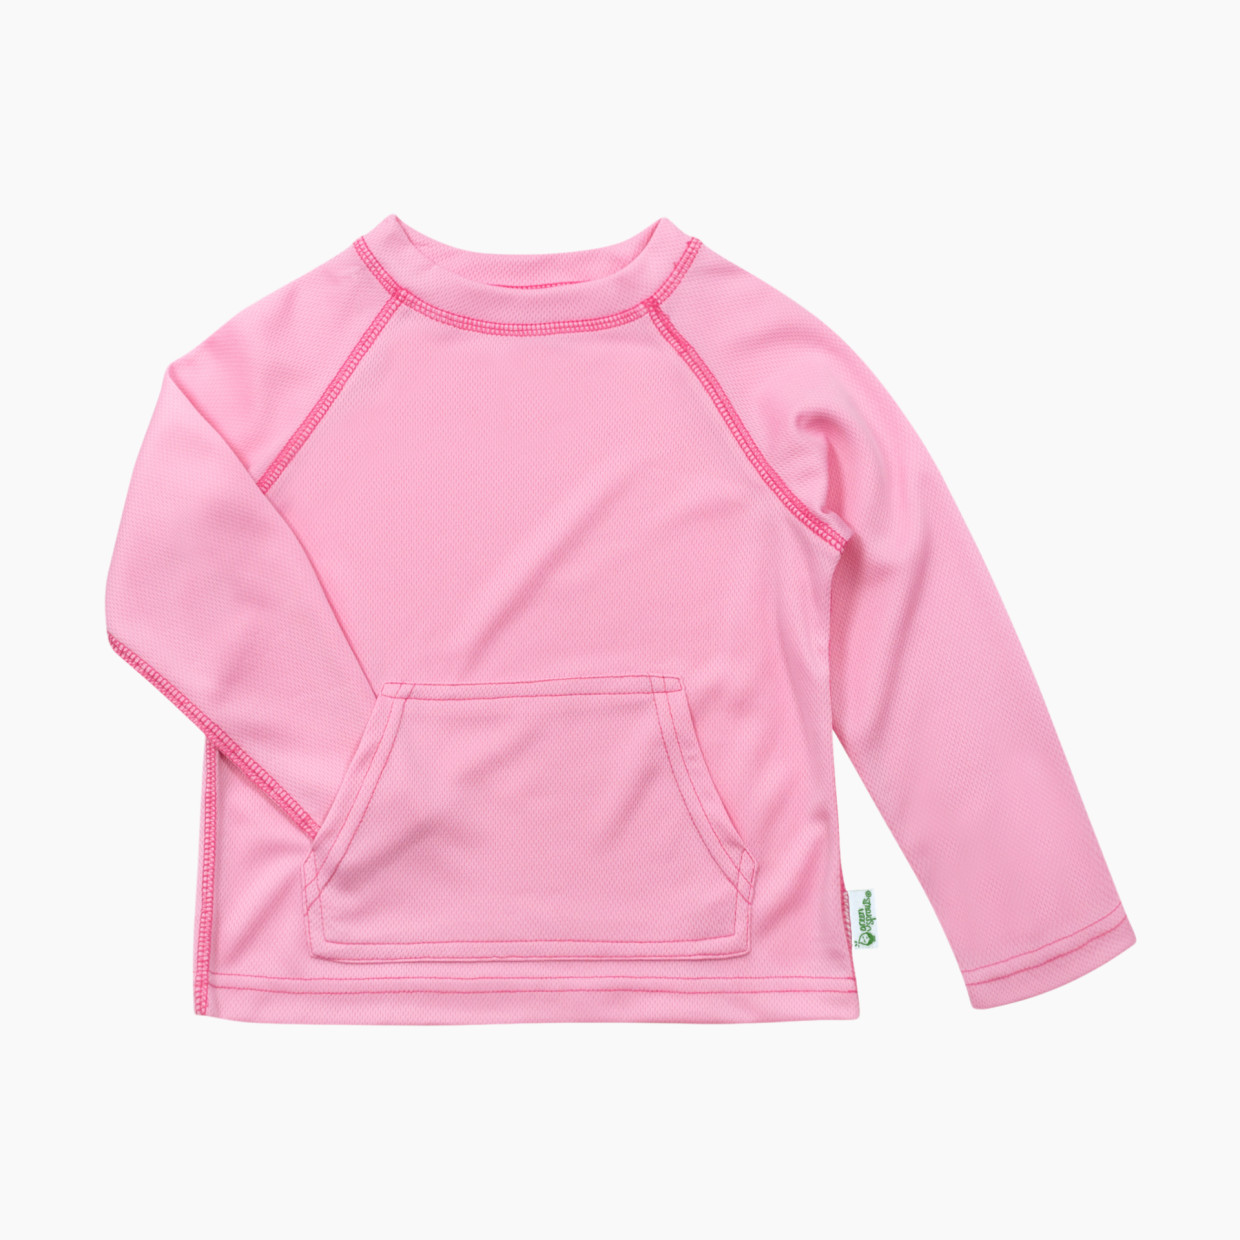 GREEN SPROUTS UPF50 Eco Breathable Sun Shirt - Light Pink, 6-12 Months.